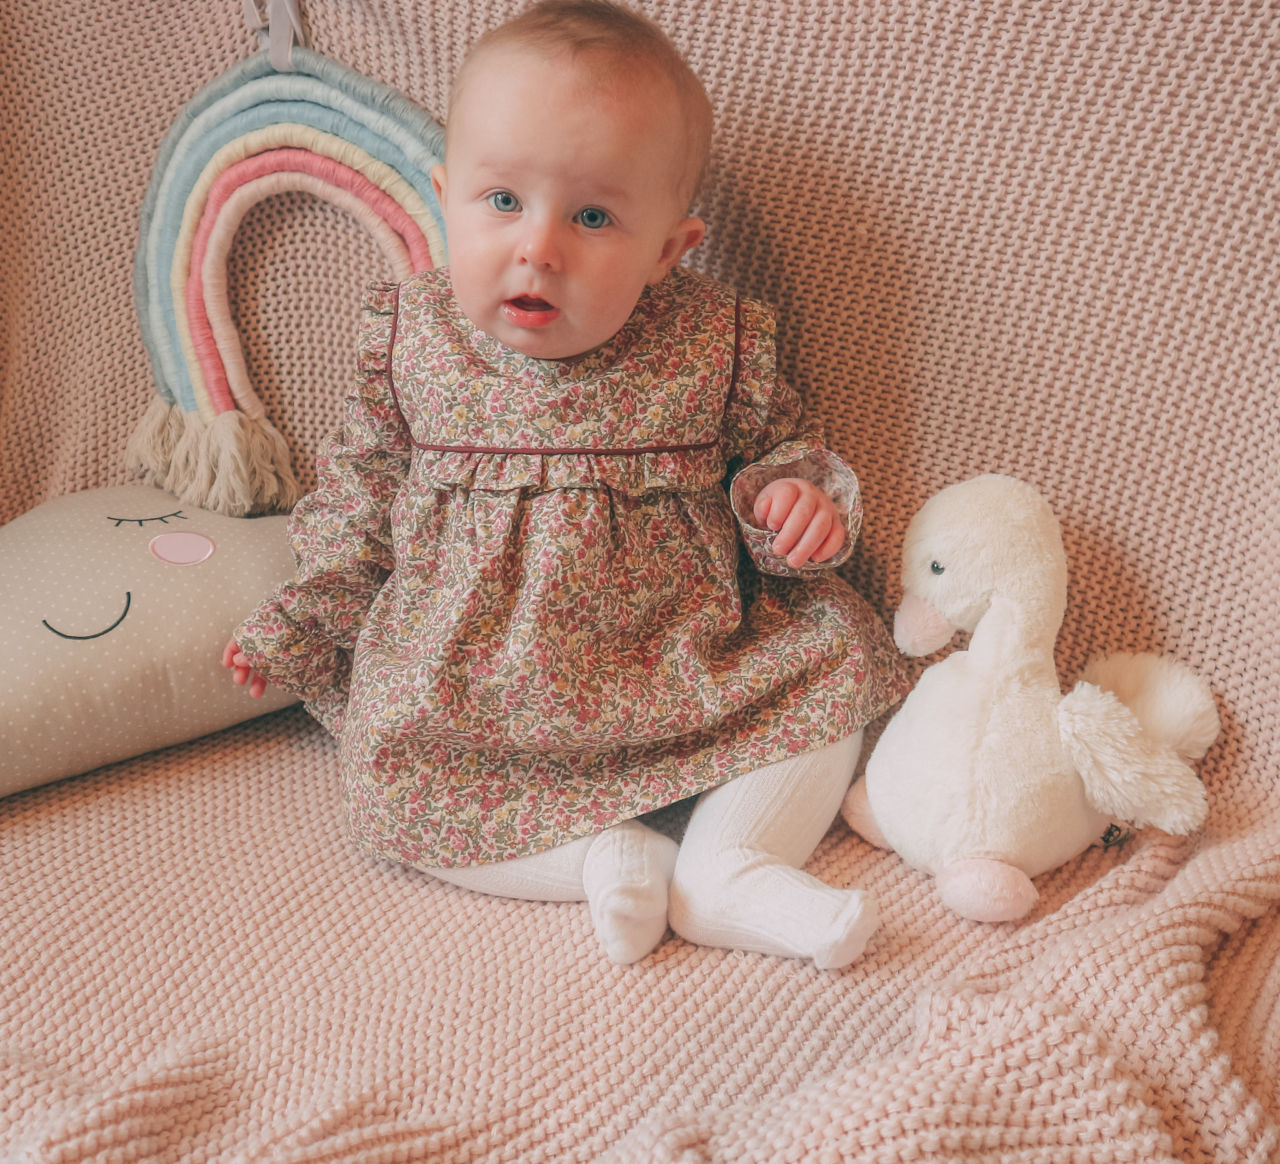 La Coqueta baby outfit review